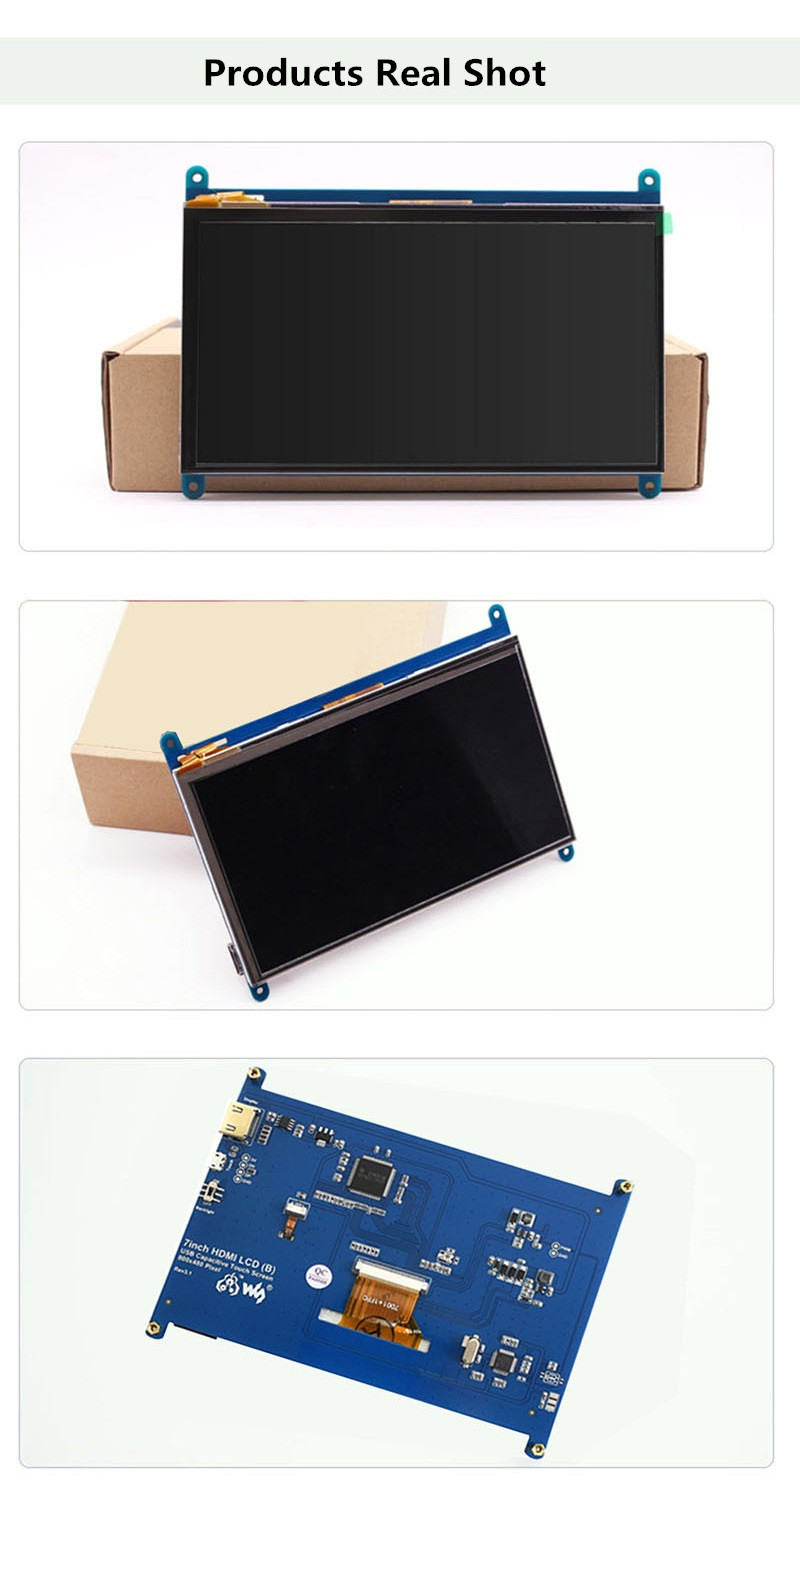 Raspberry-Pi-4B-LCD-Capacitive-Touch-Screen-7-inch-HDMI-HD-Display-USB-Drive-free-1024times600PX-IPS-1748193